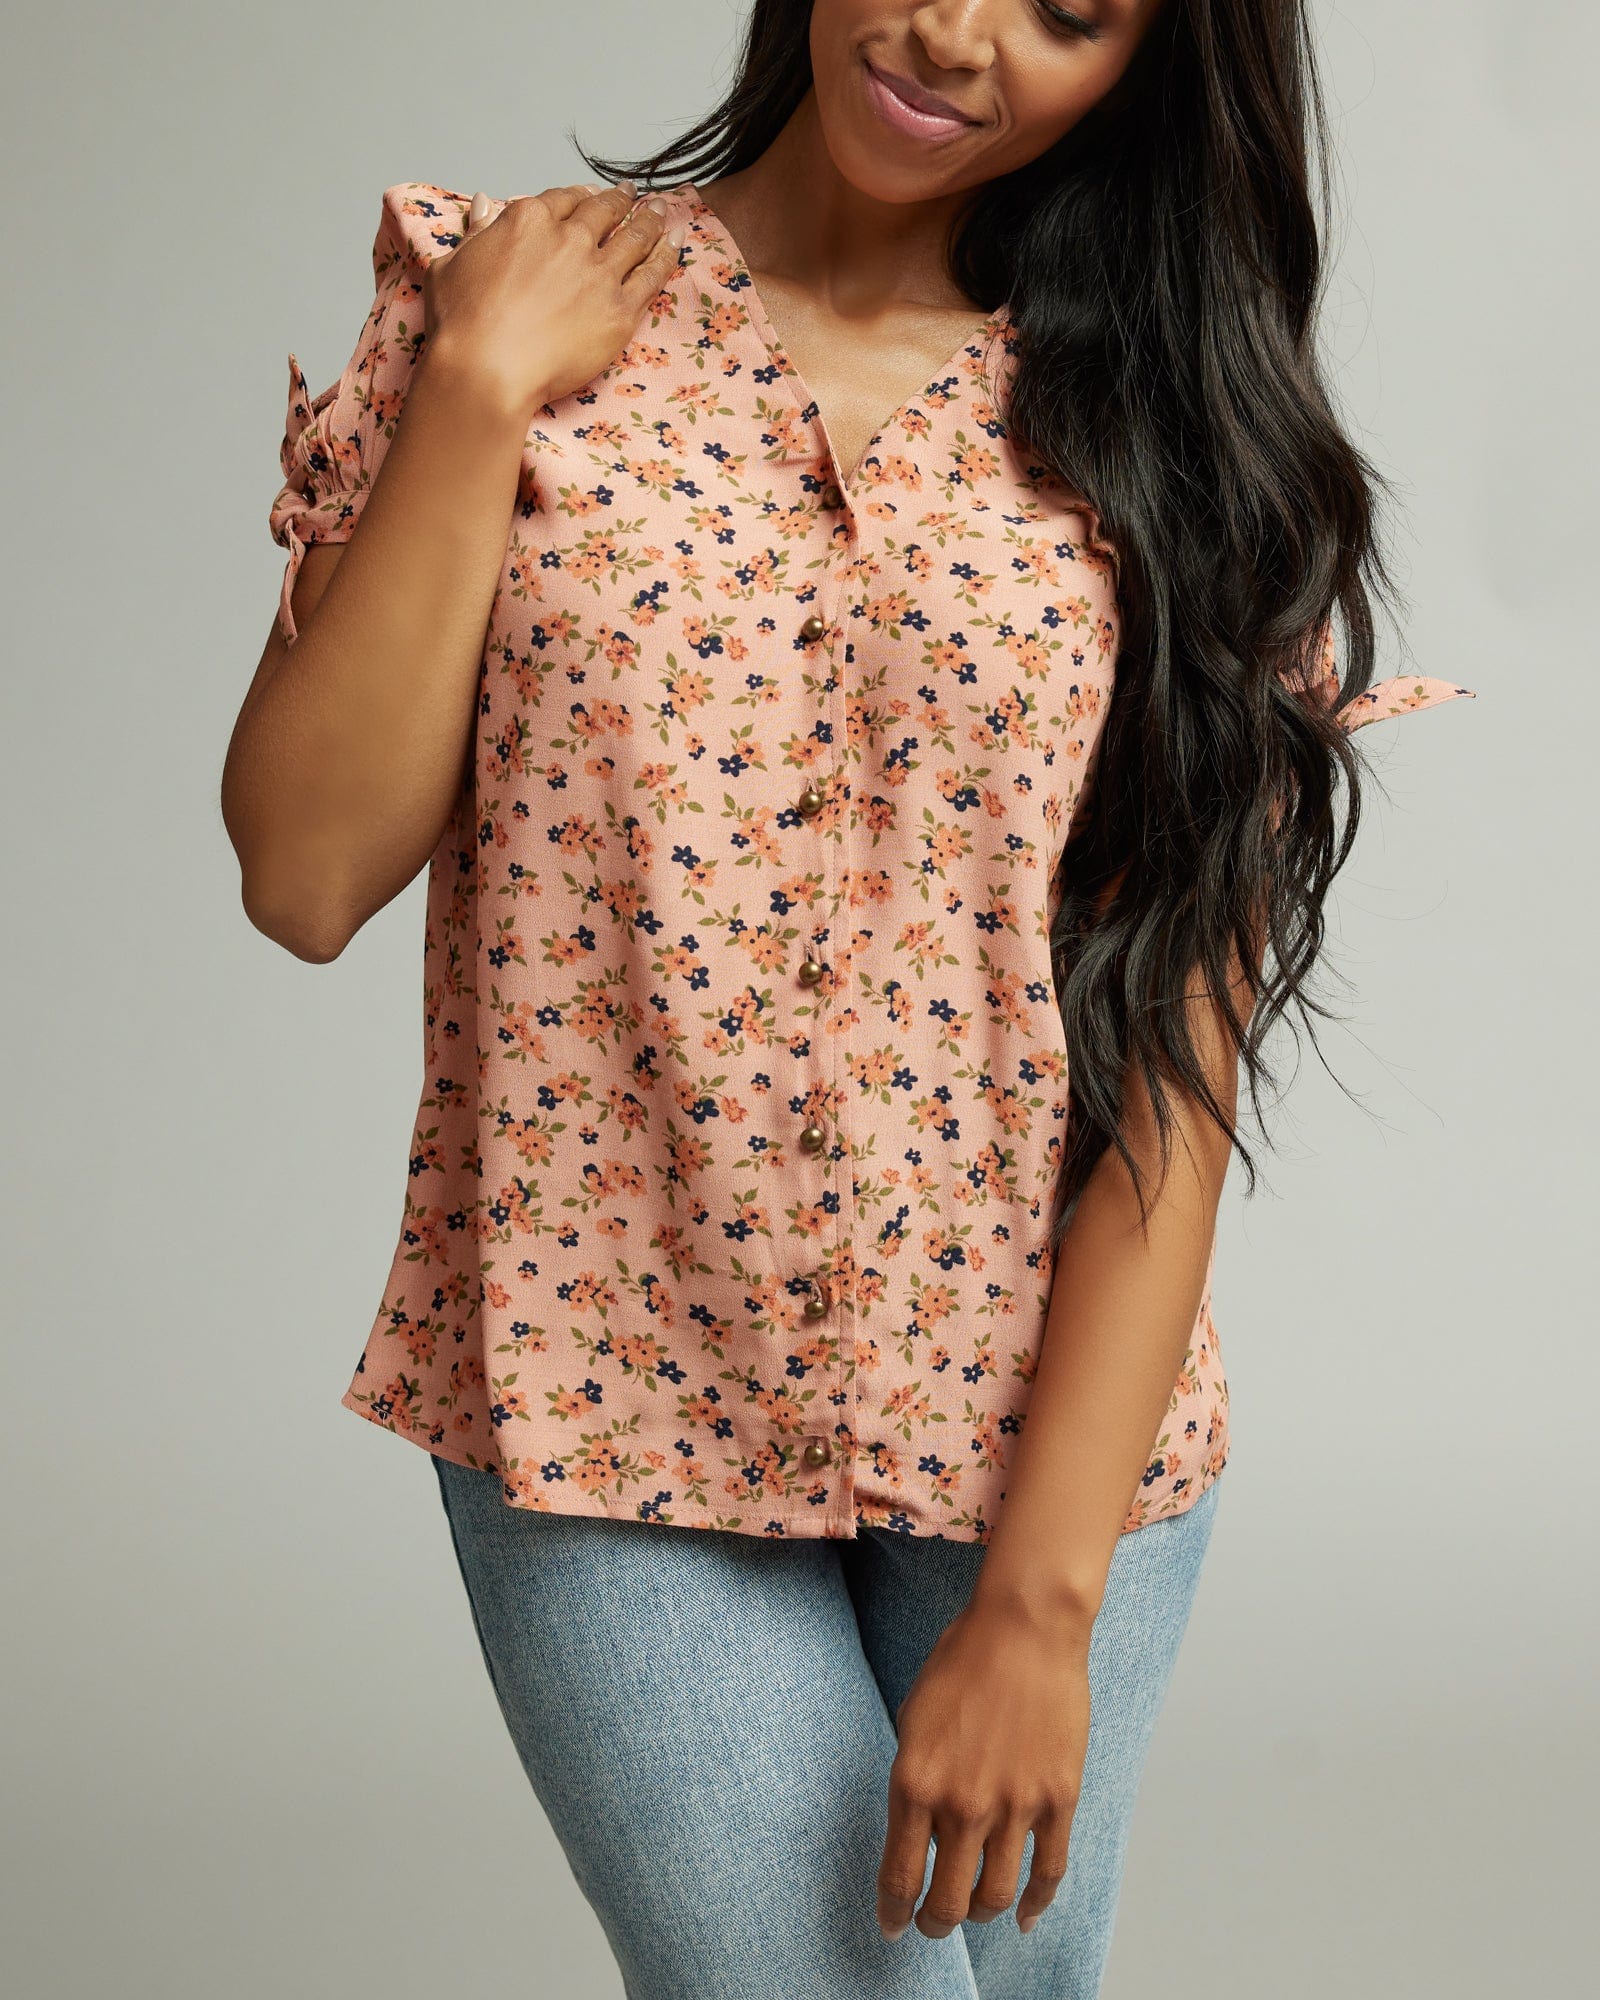 Woman in a short sleeve, pink floral print top